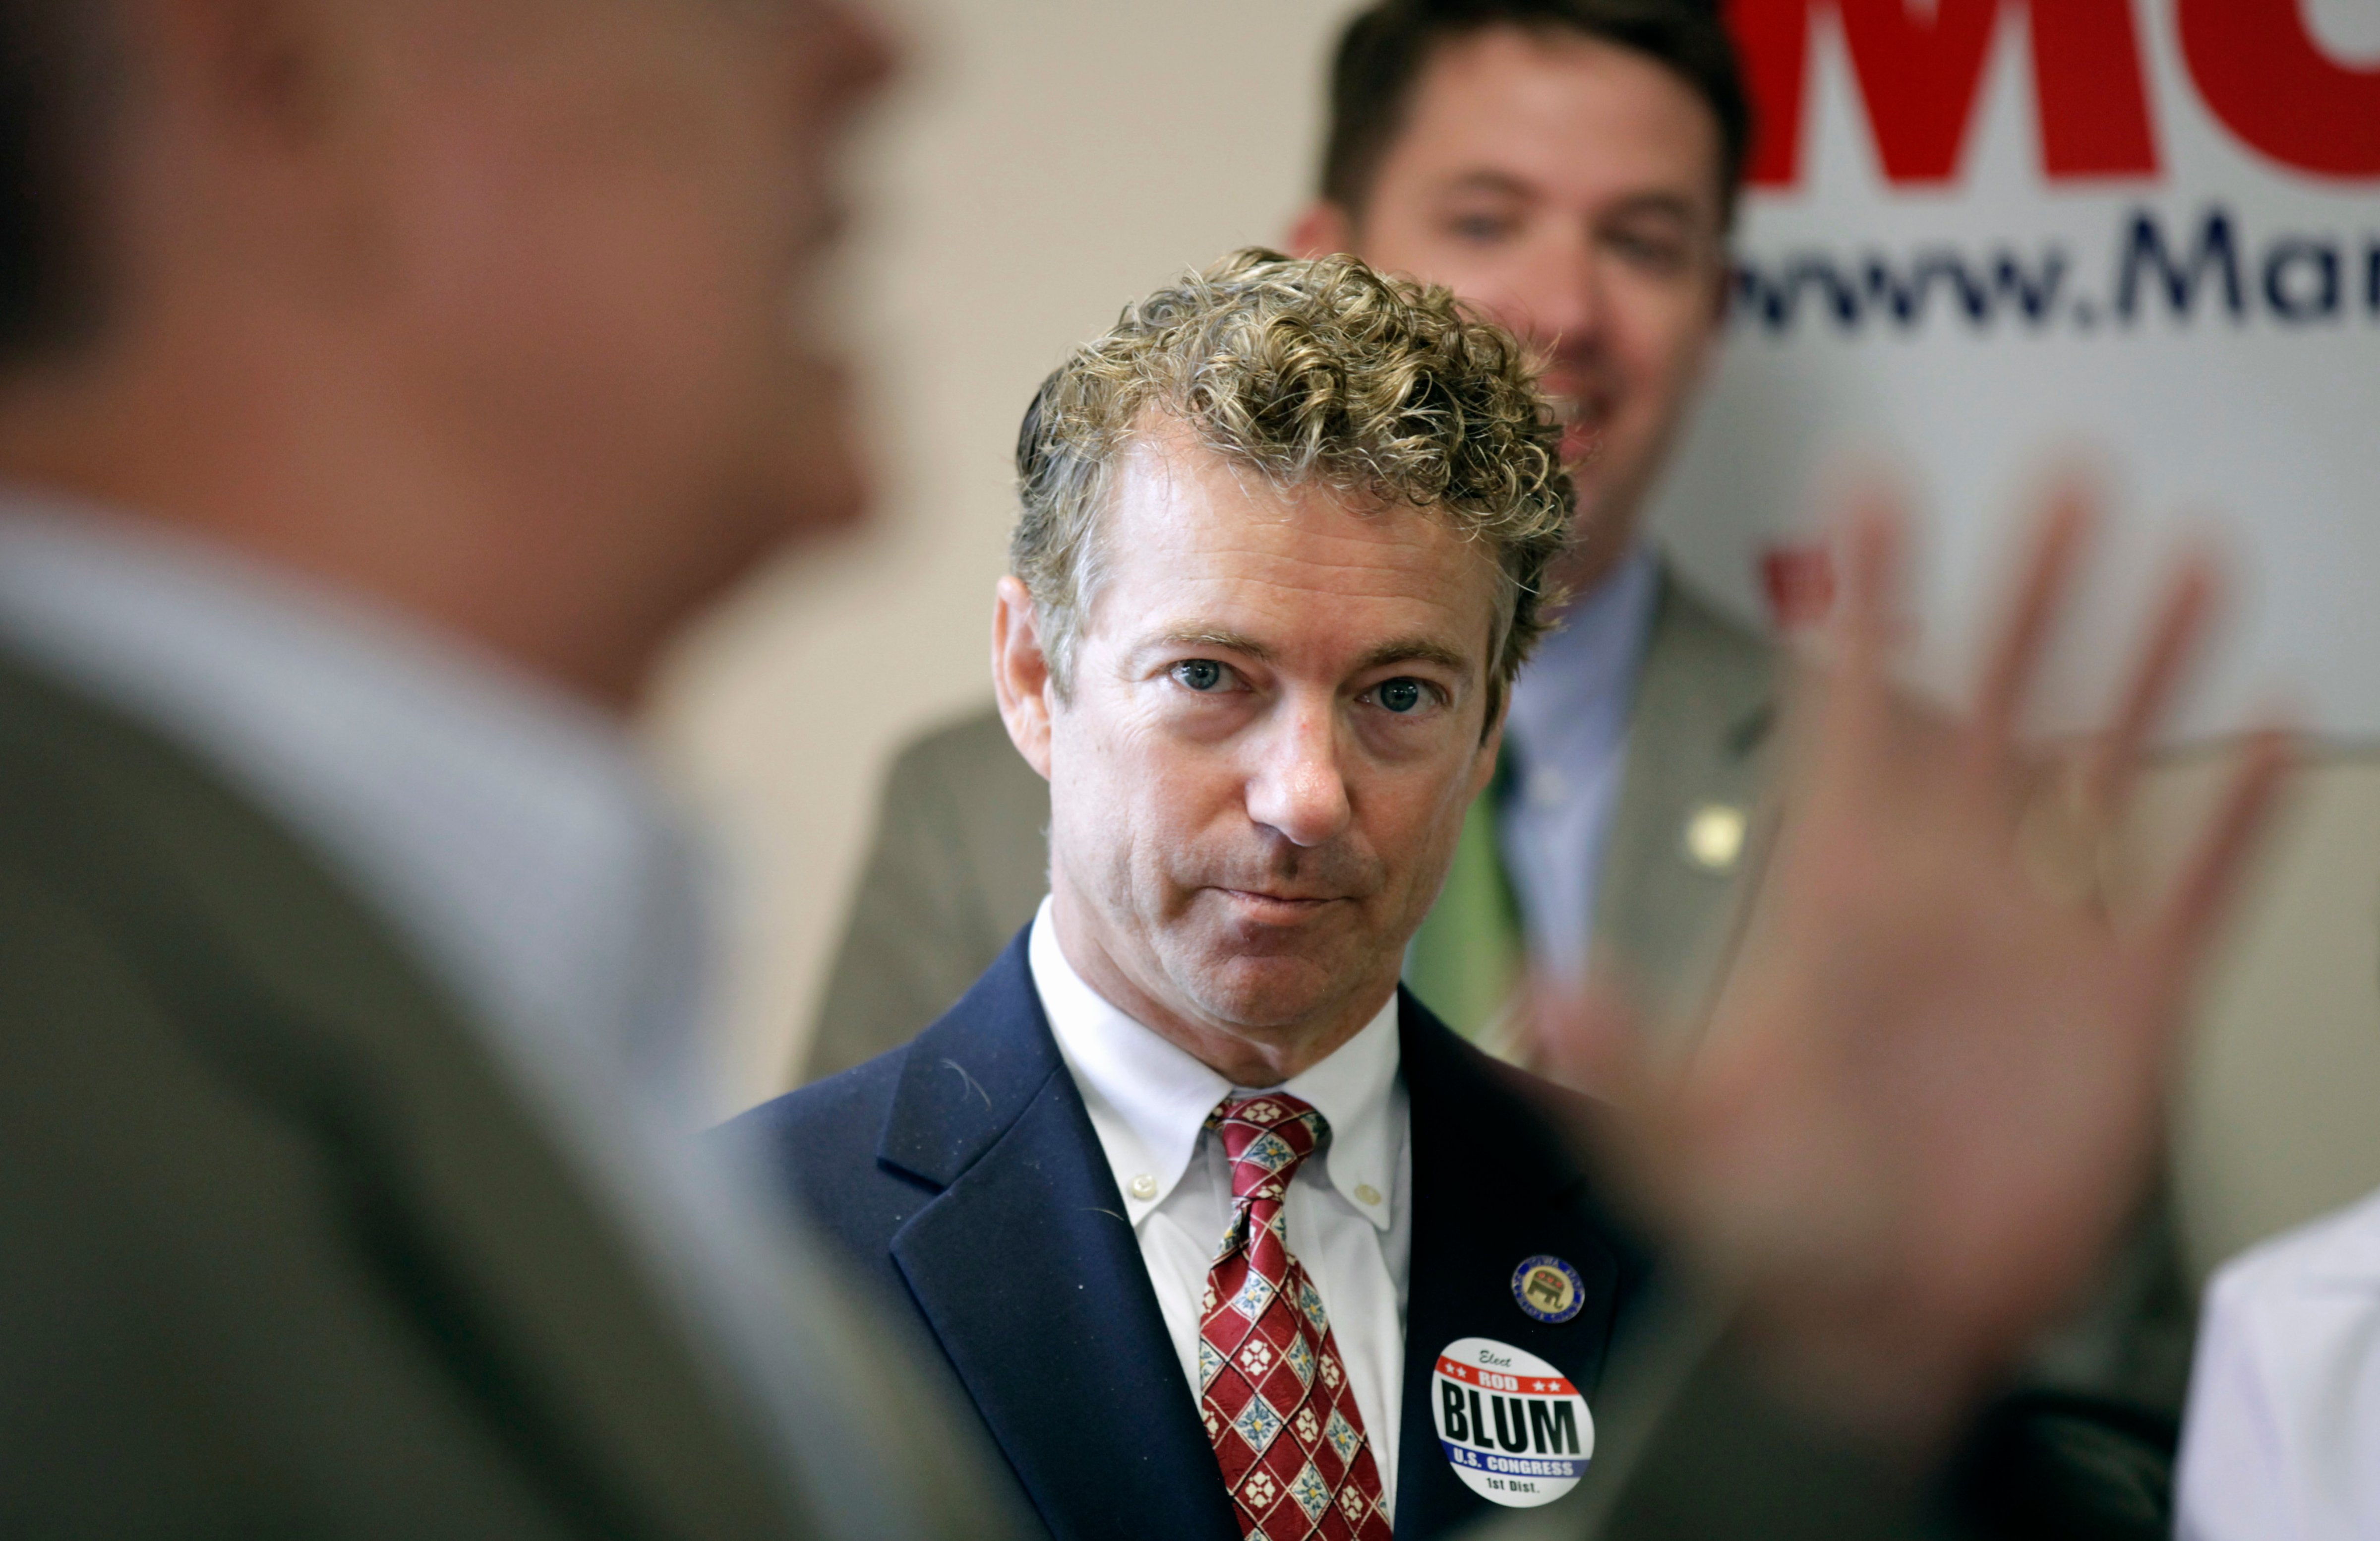 Sen. Rand Paul, R-Ky. listens he is introduced to speak by Iowa Republican congressional candidate Rod Blum, left, during a meeting with local Republicans, Aug. 5, 2014, in Hiawatha, Iowa. (Charlie Neibergall—AP)